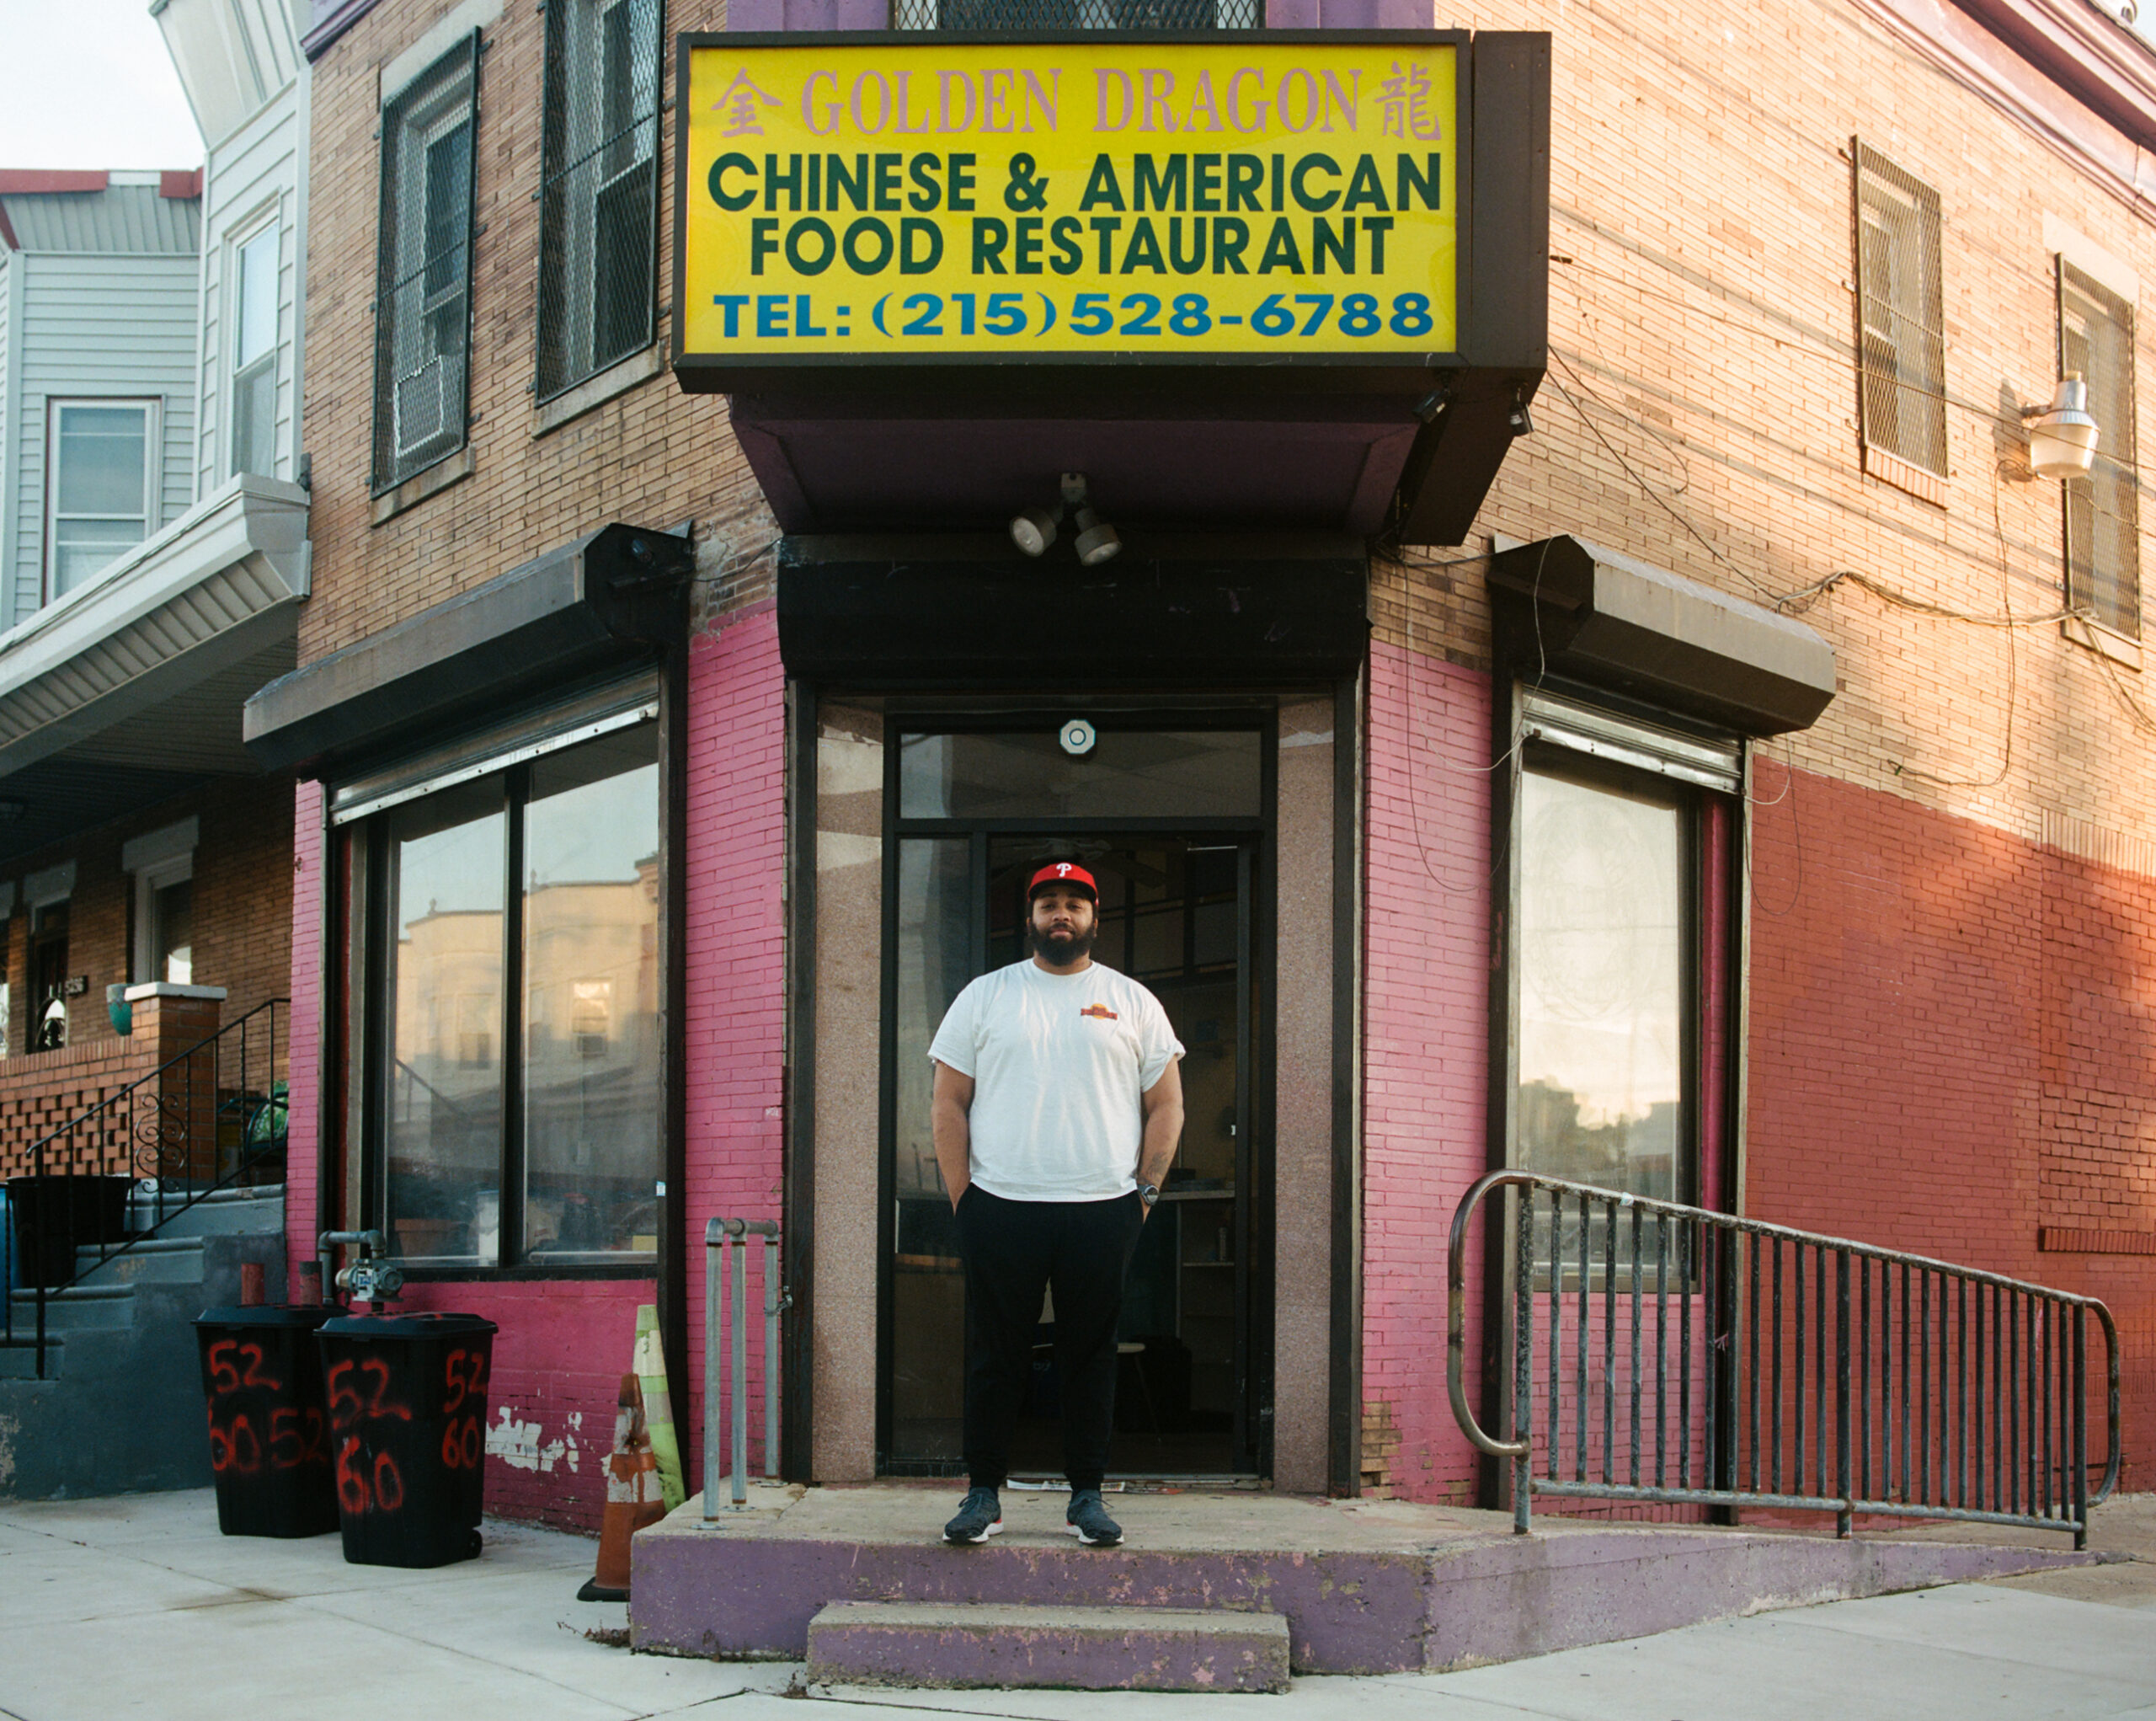 A black man in a white shirt and red cap stands in front of a corner storefront with his hands in his pocket. A yellow sign above him says Golden Dragon Chinese & American Food Restaurant.